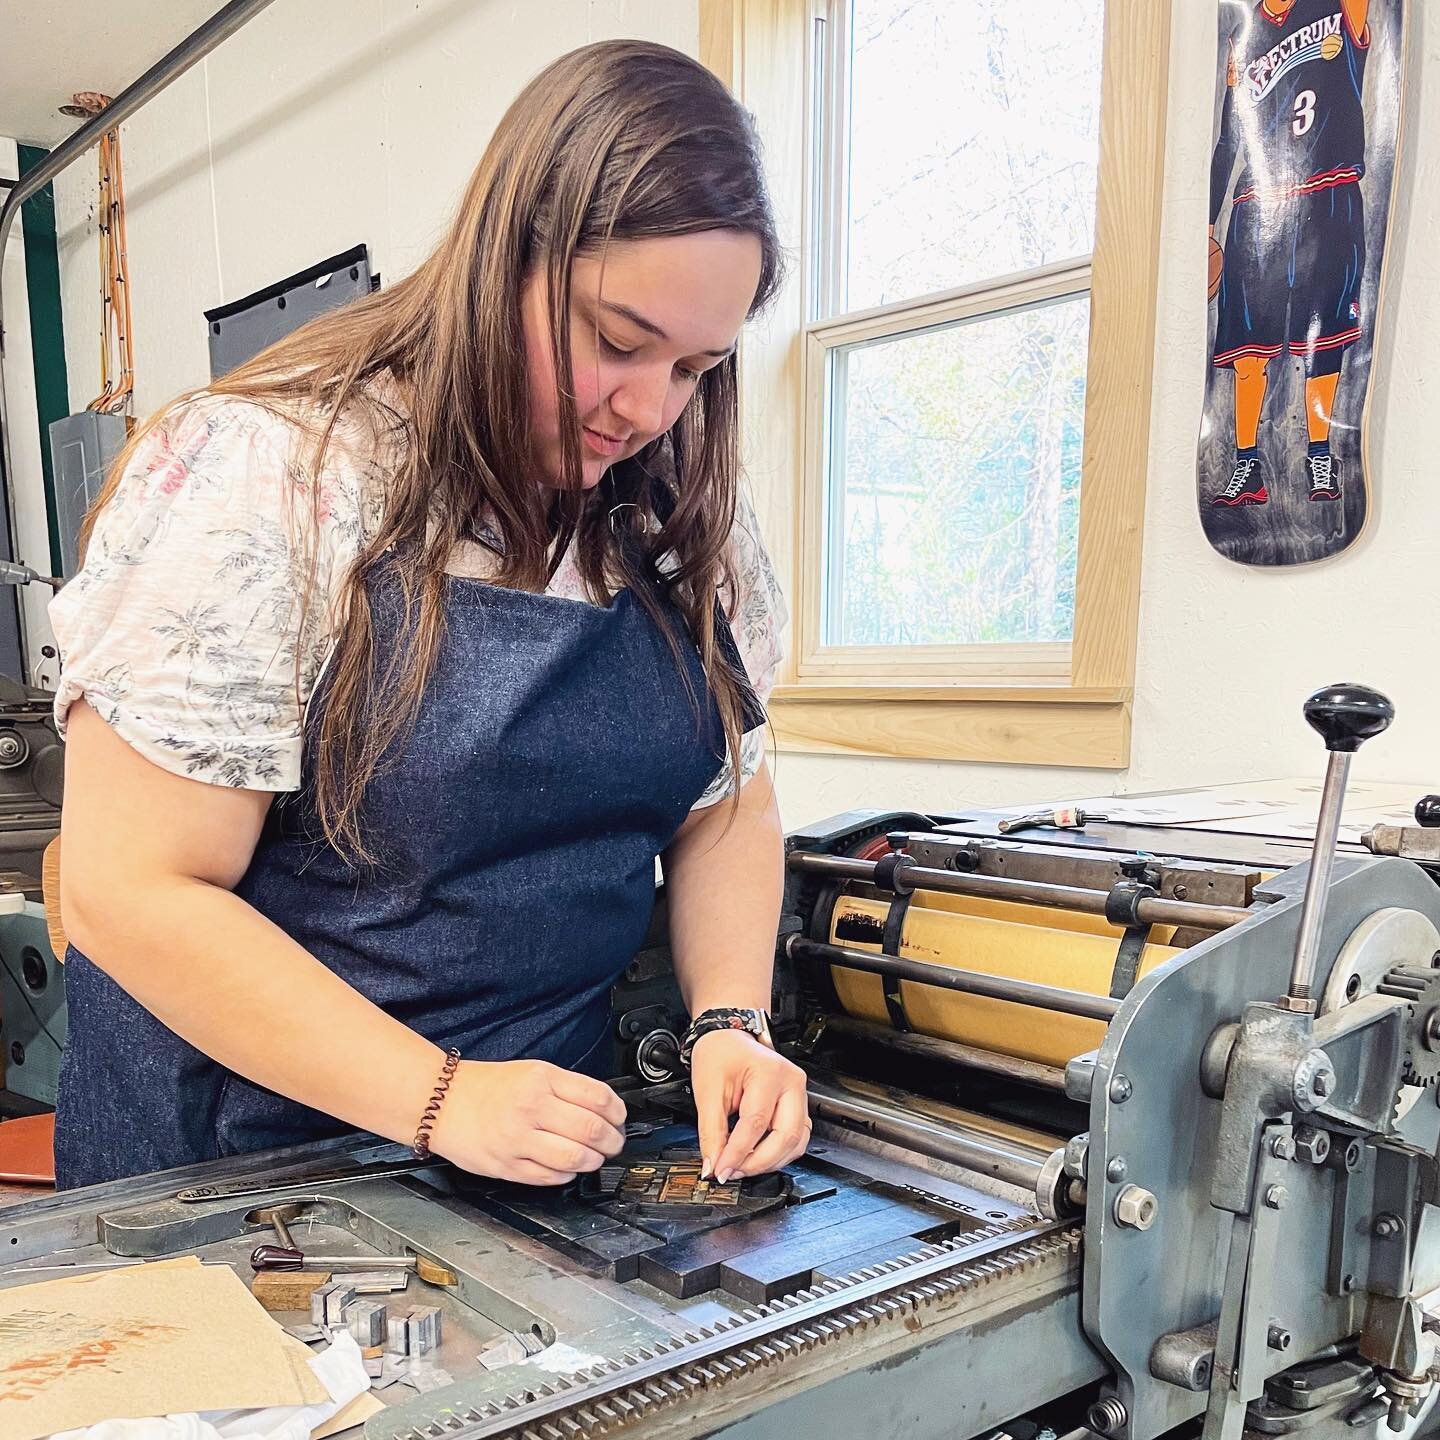 It&rsquo;s all letterpress this week in the shop! Libby Morgan @libbyslauenwhiteart has been printing quilt squares on our Reprex all week using a super cool @insta.dry.inc Rotary Angle Chase she brought along. Read more about Libby below!

Libby Mor